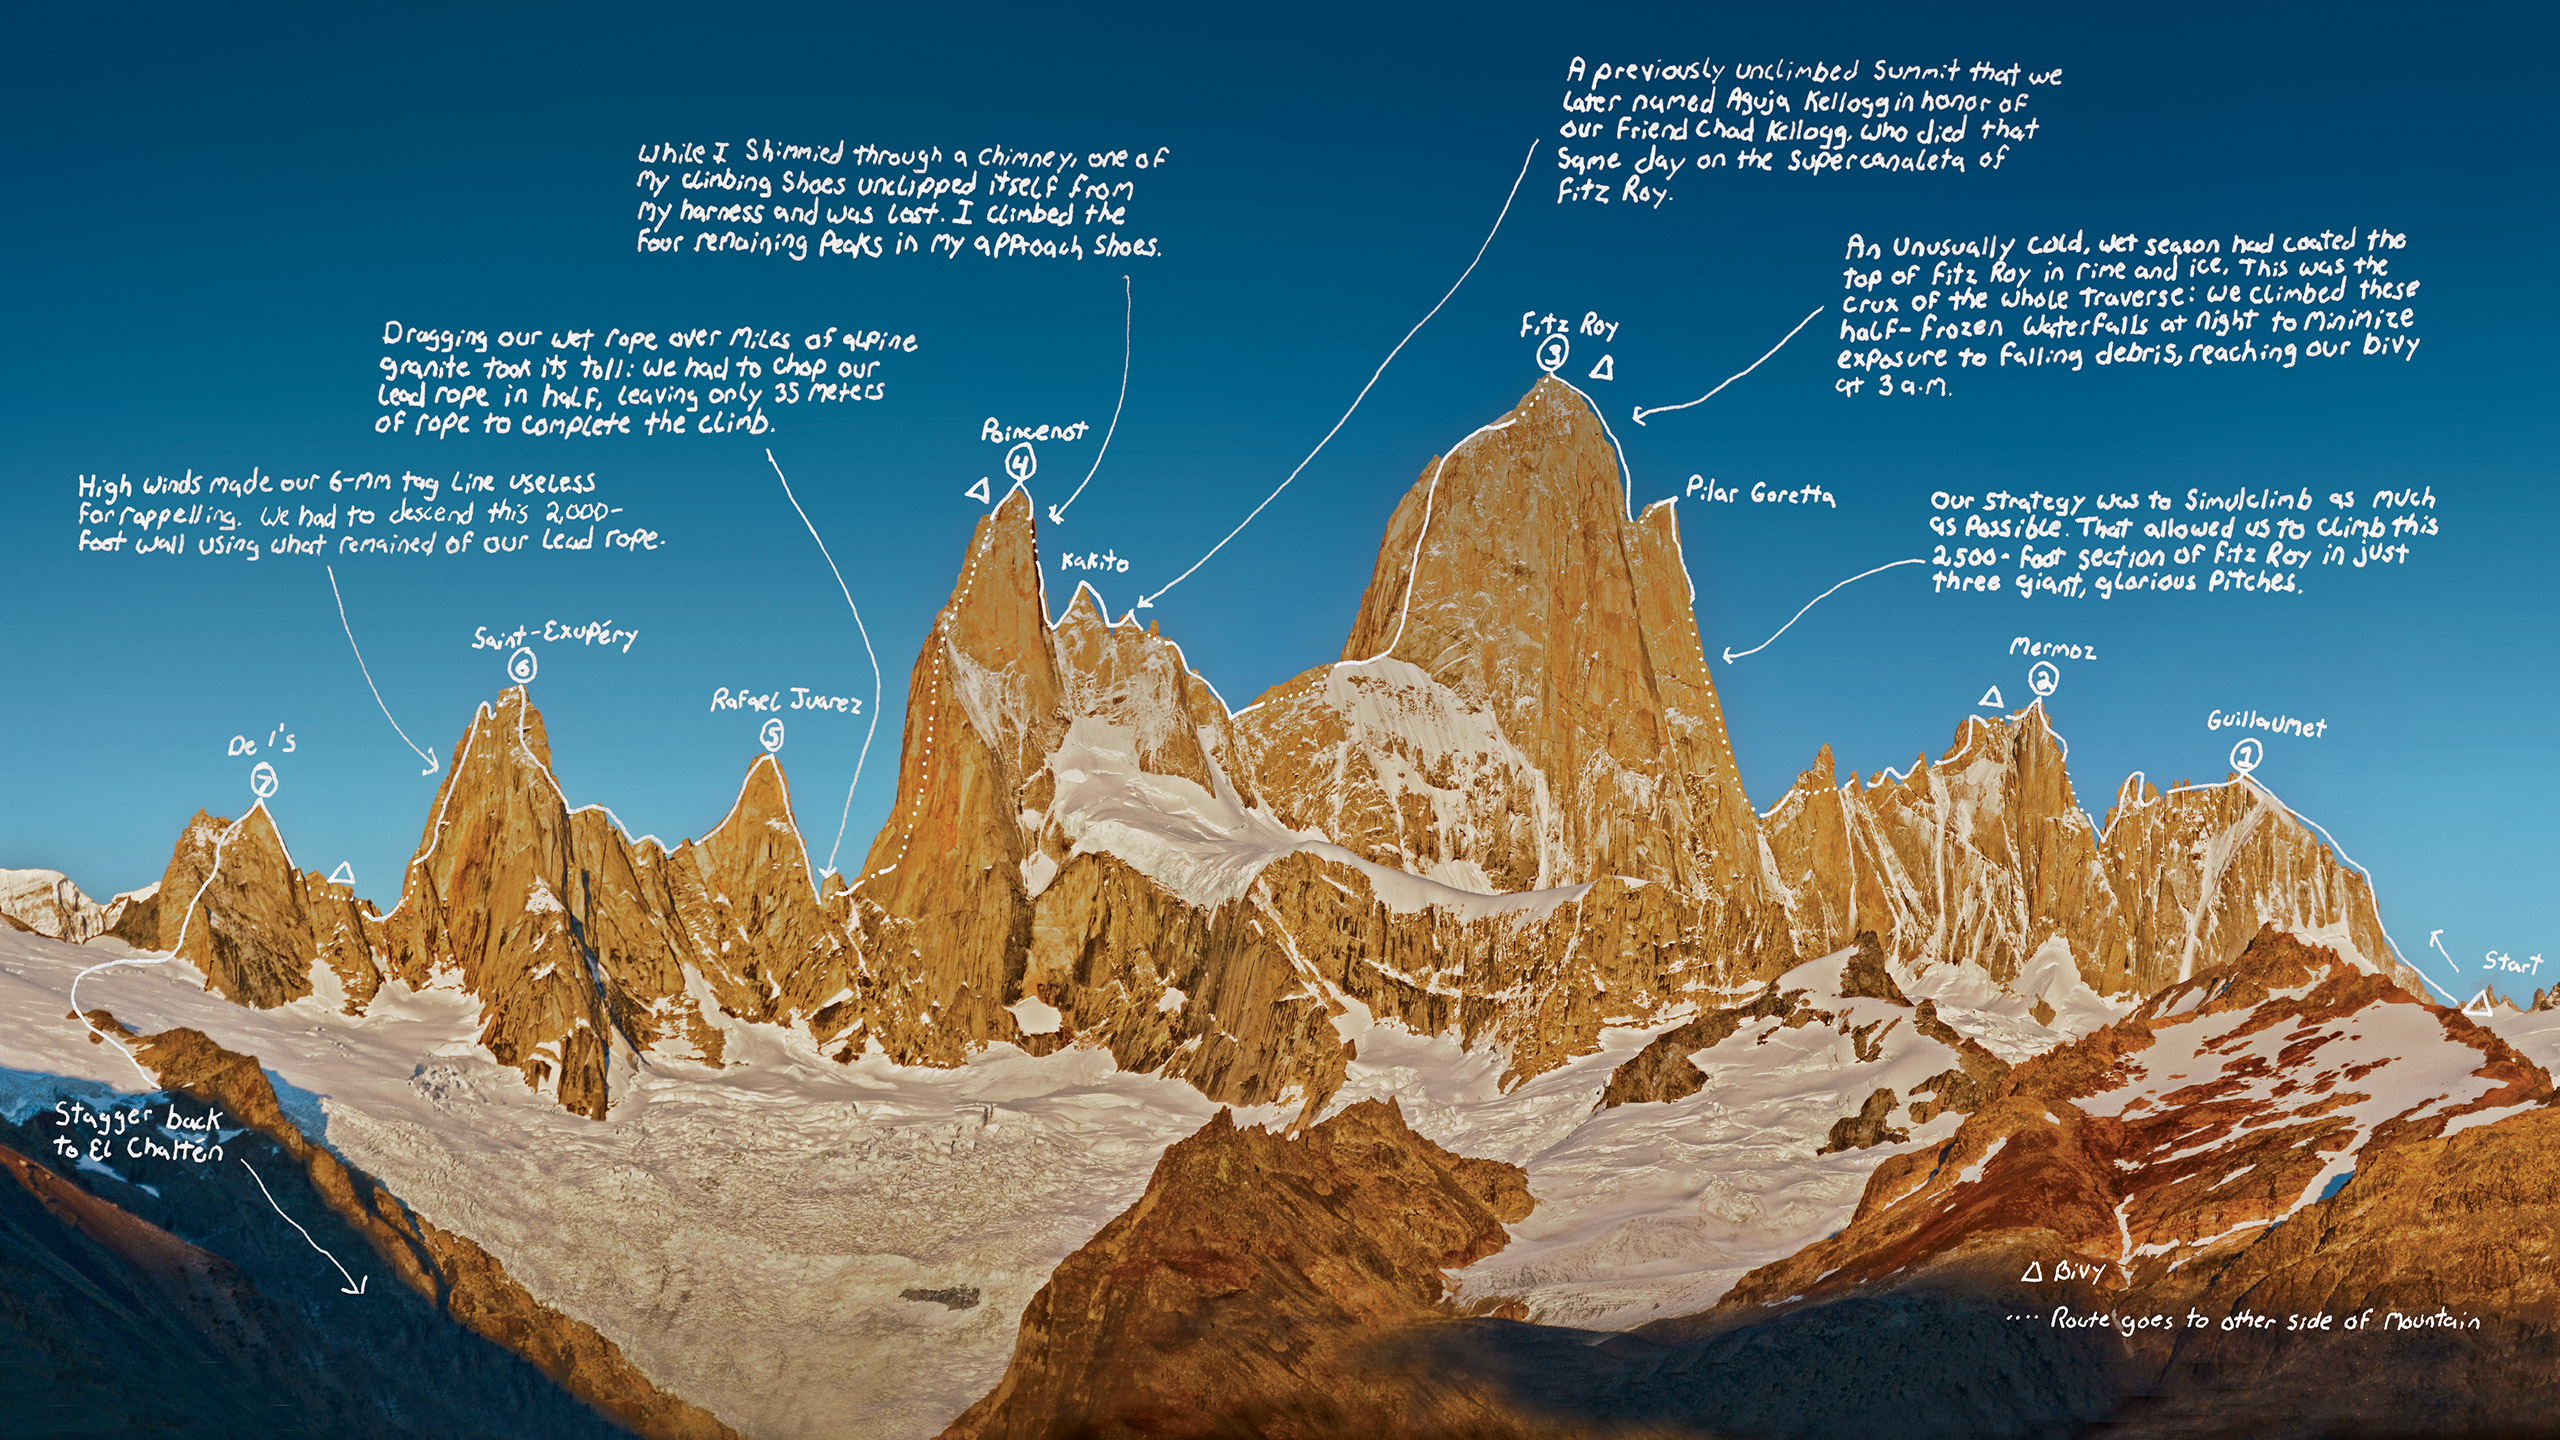 The route follows the iconic skyline from right to left over all main peaks. Source: . Credit: Patagonia,  Licensed under: Public Domain.